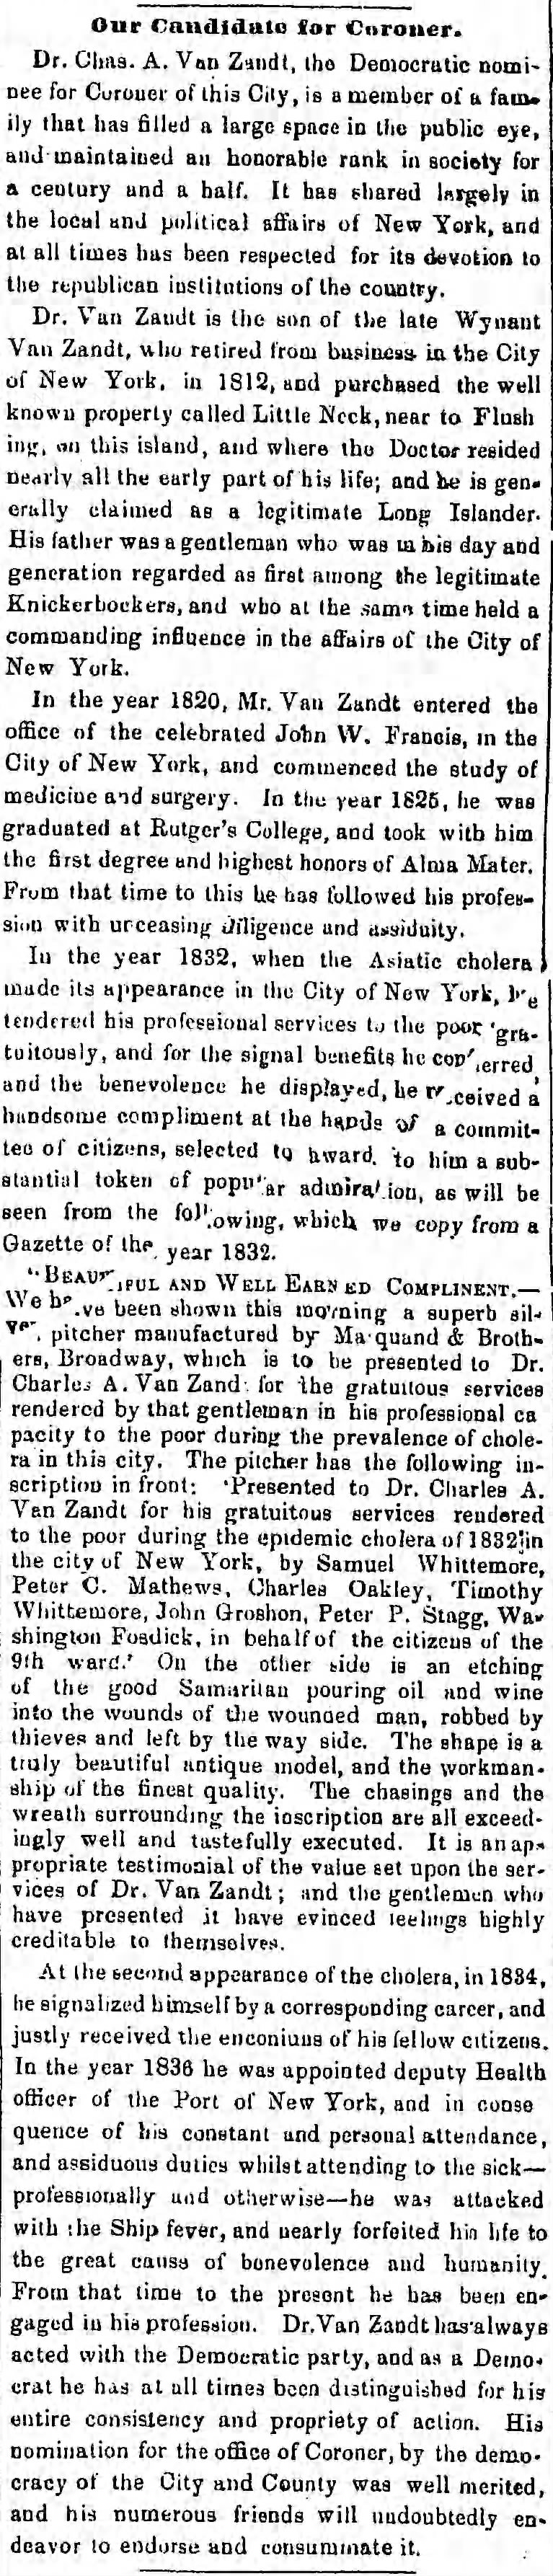 Dr. Charles A. Van Zandt - candidate for coroner, 1851